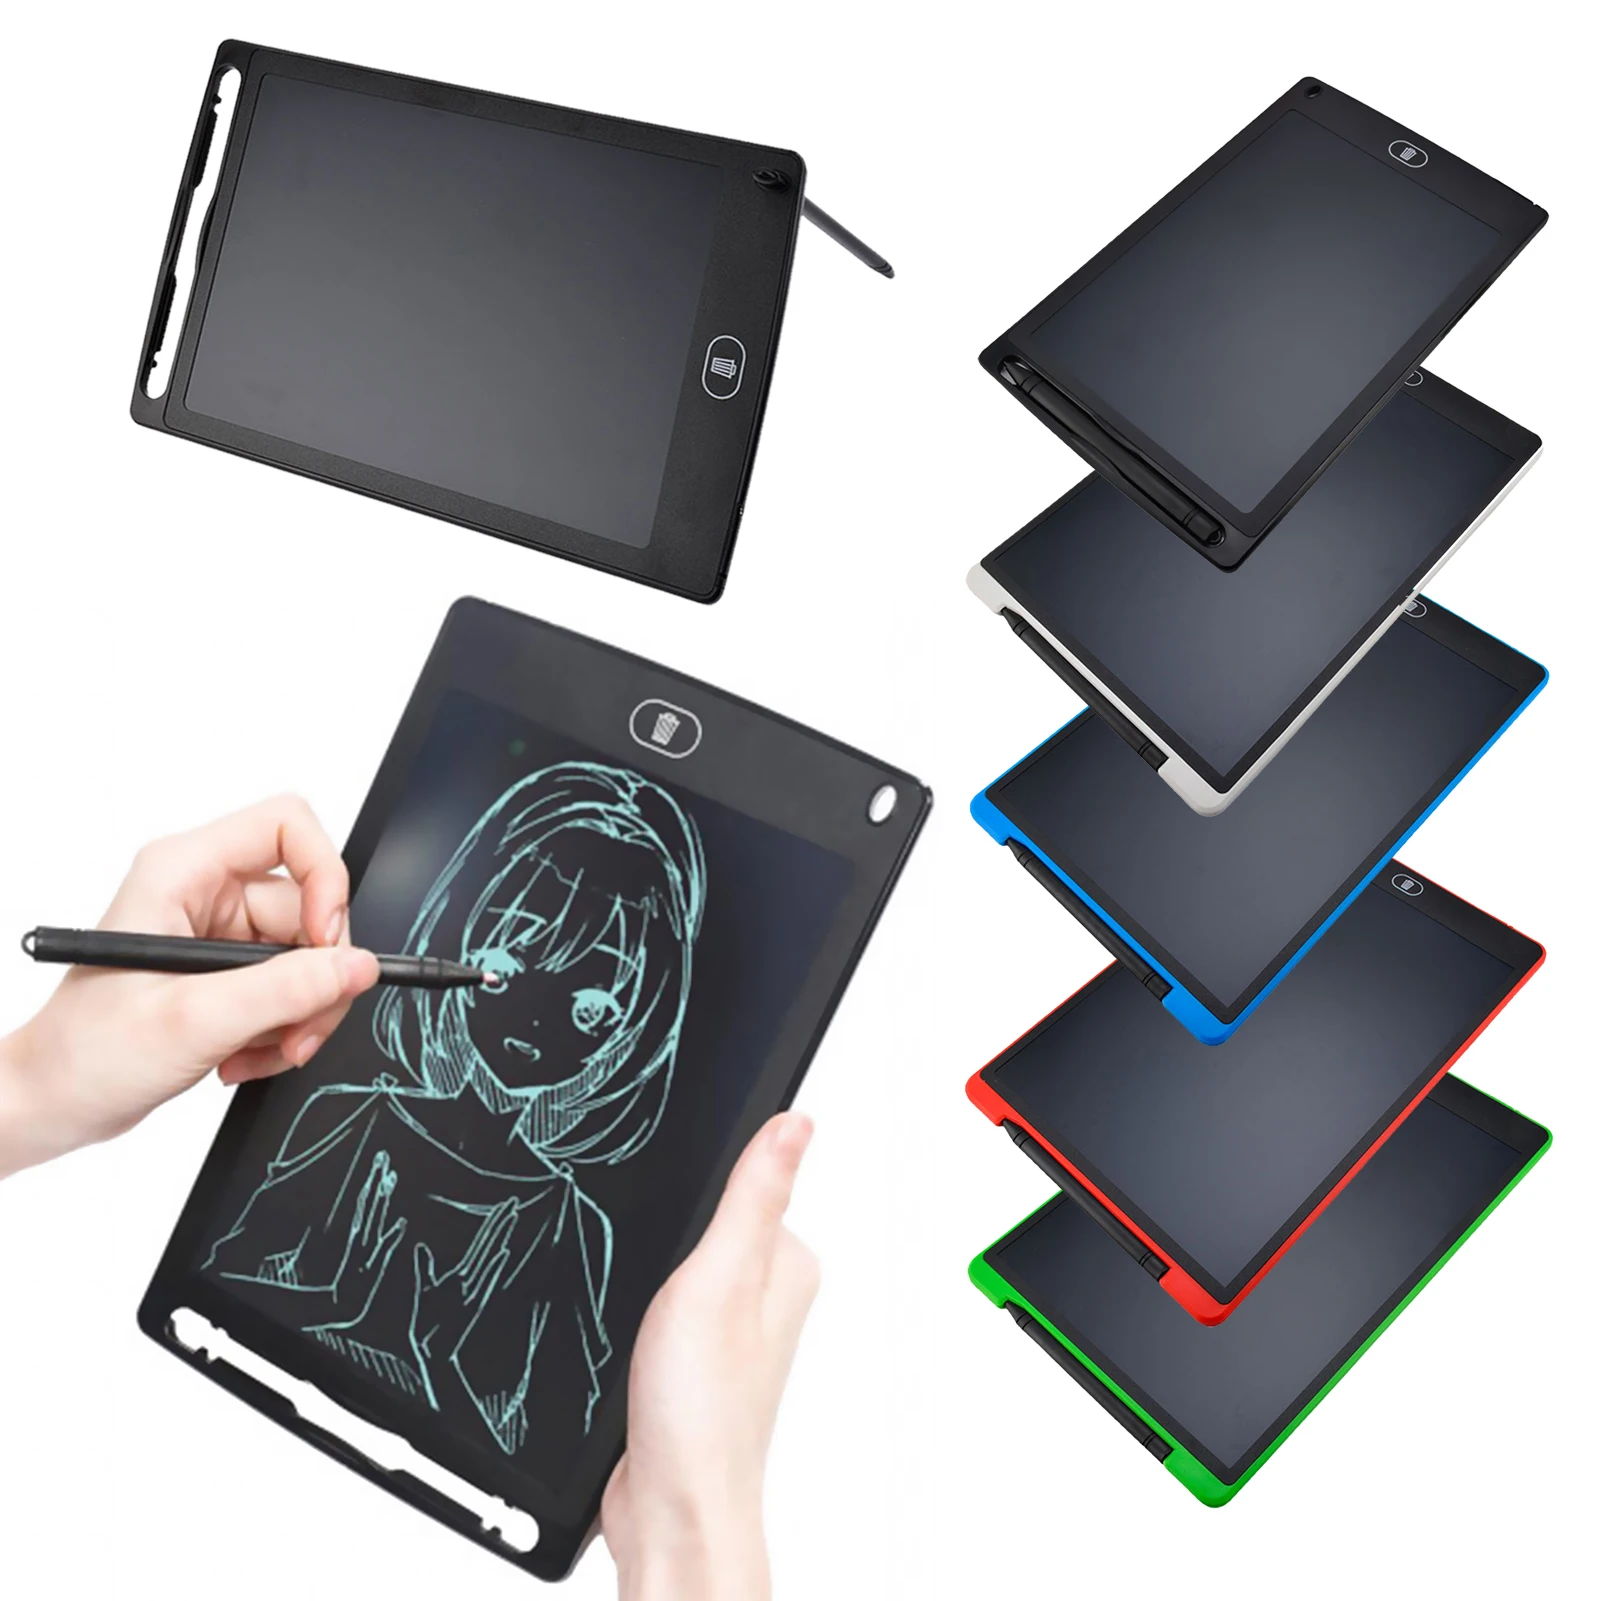 https://ae01.alicdn.com/kf/H951c0405e45f4401adf1c84a4658179c7/Lcd-Writing-Tablet-Xmas-Gift-For-Kids-Electric-Drawing-Board-Digital-Graphic-Drawing-Pad-With-Pen.jpg